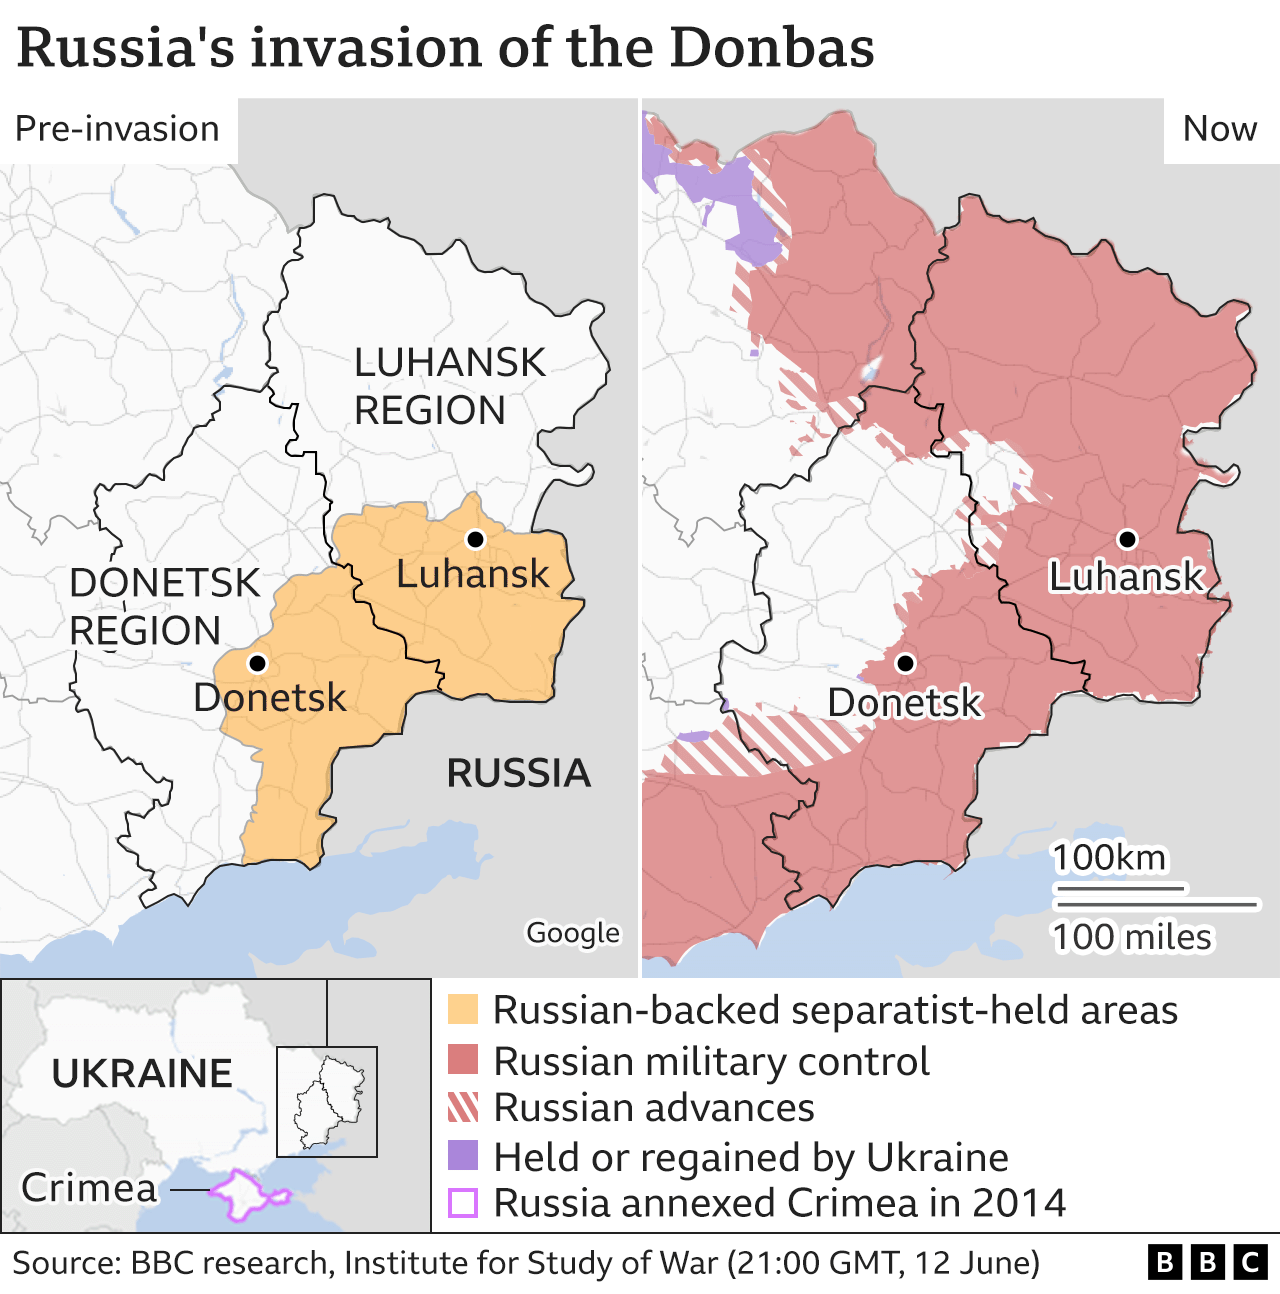 Map showing Donbas region before and after invasion, updated 13 June